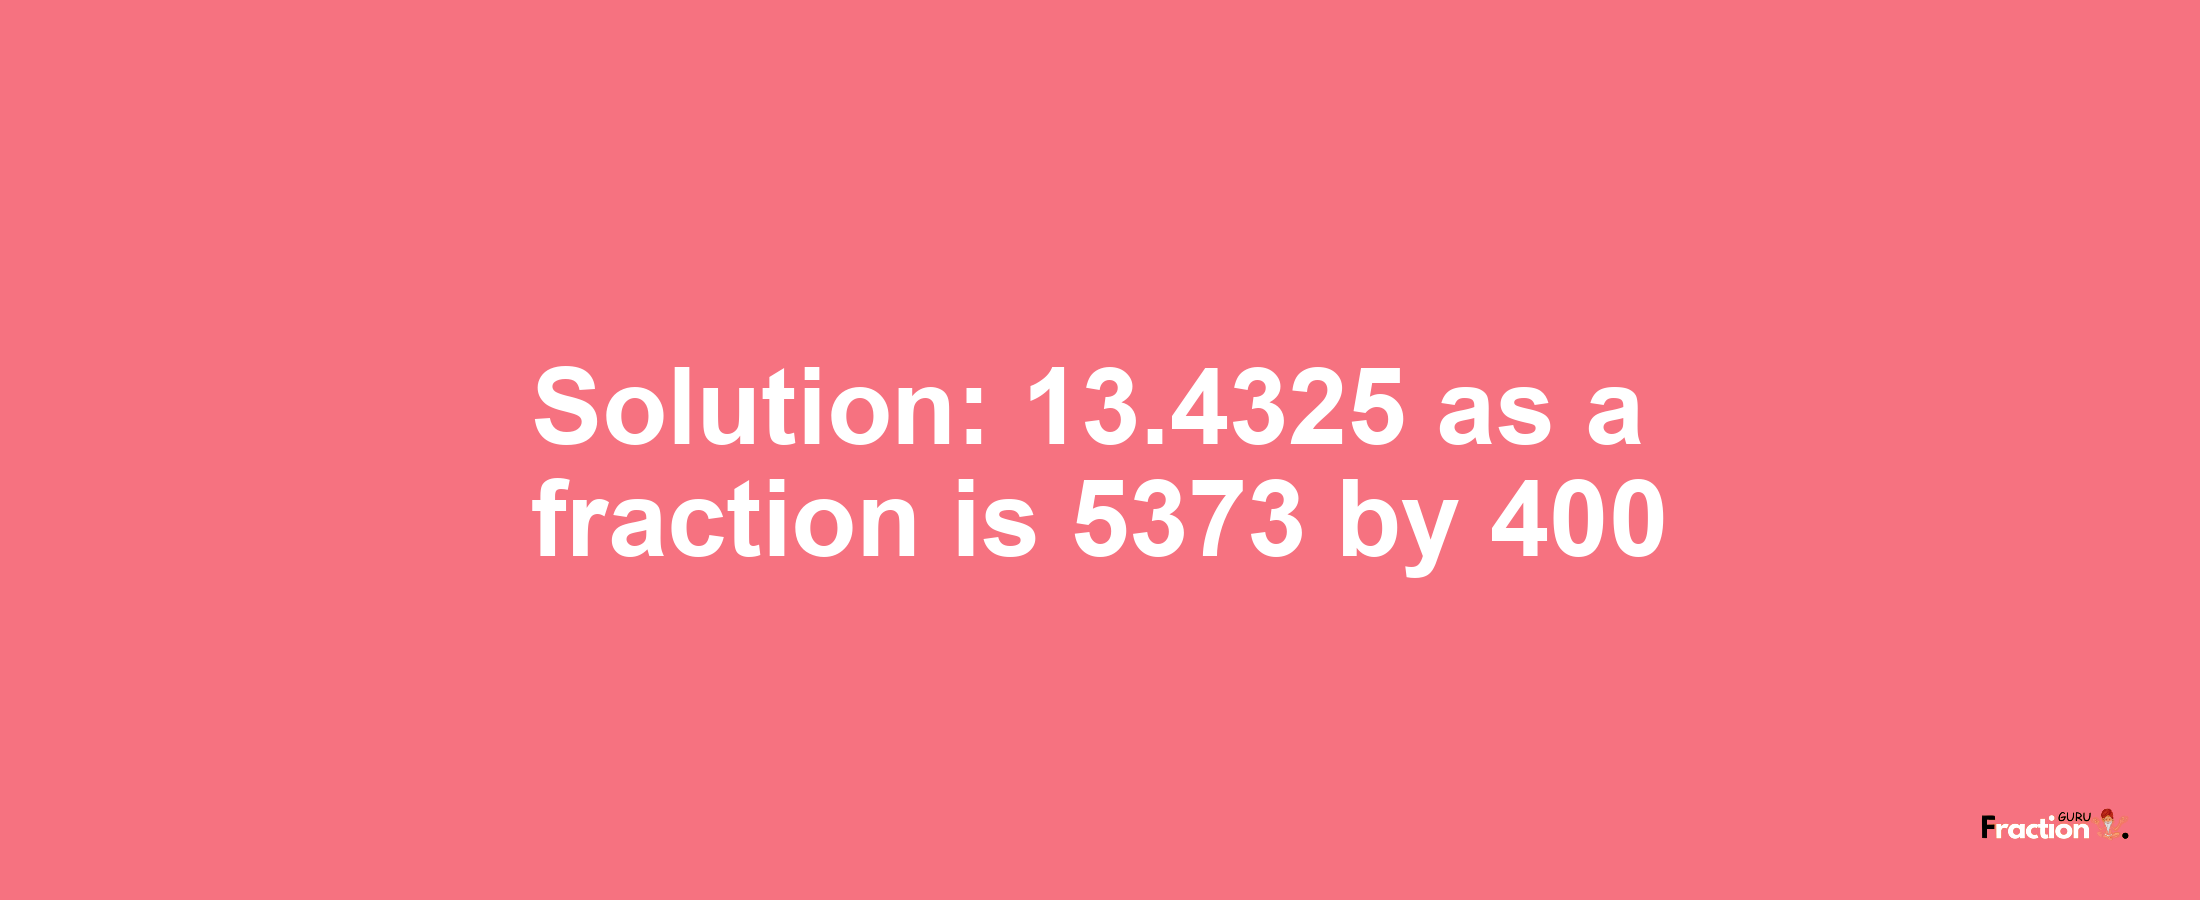 Solution:13.4325 as a fraction is 5373/400